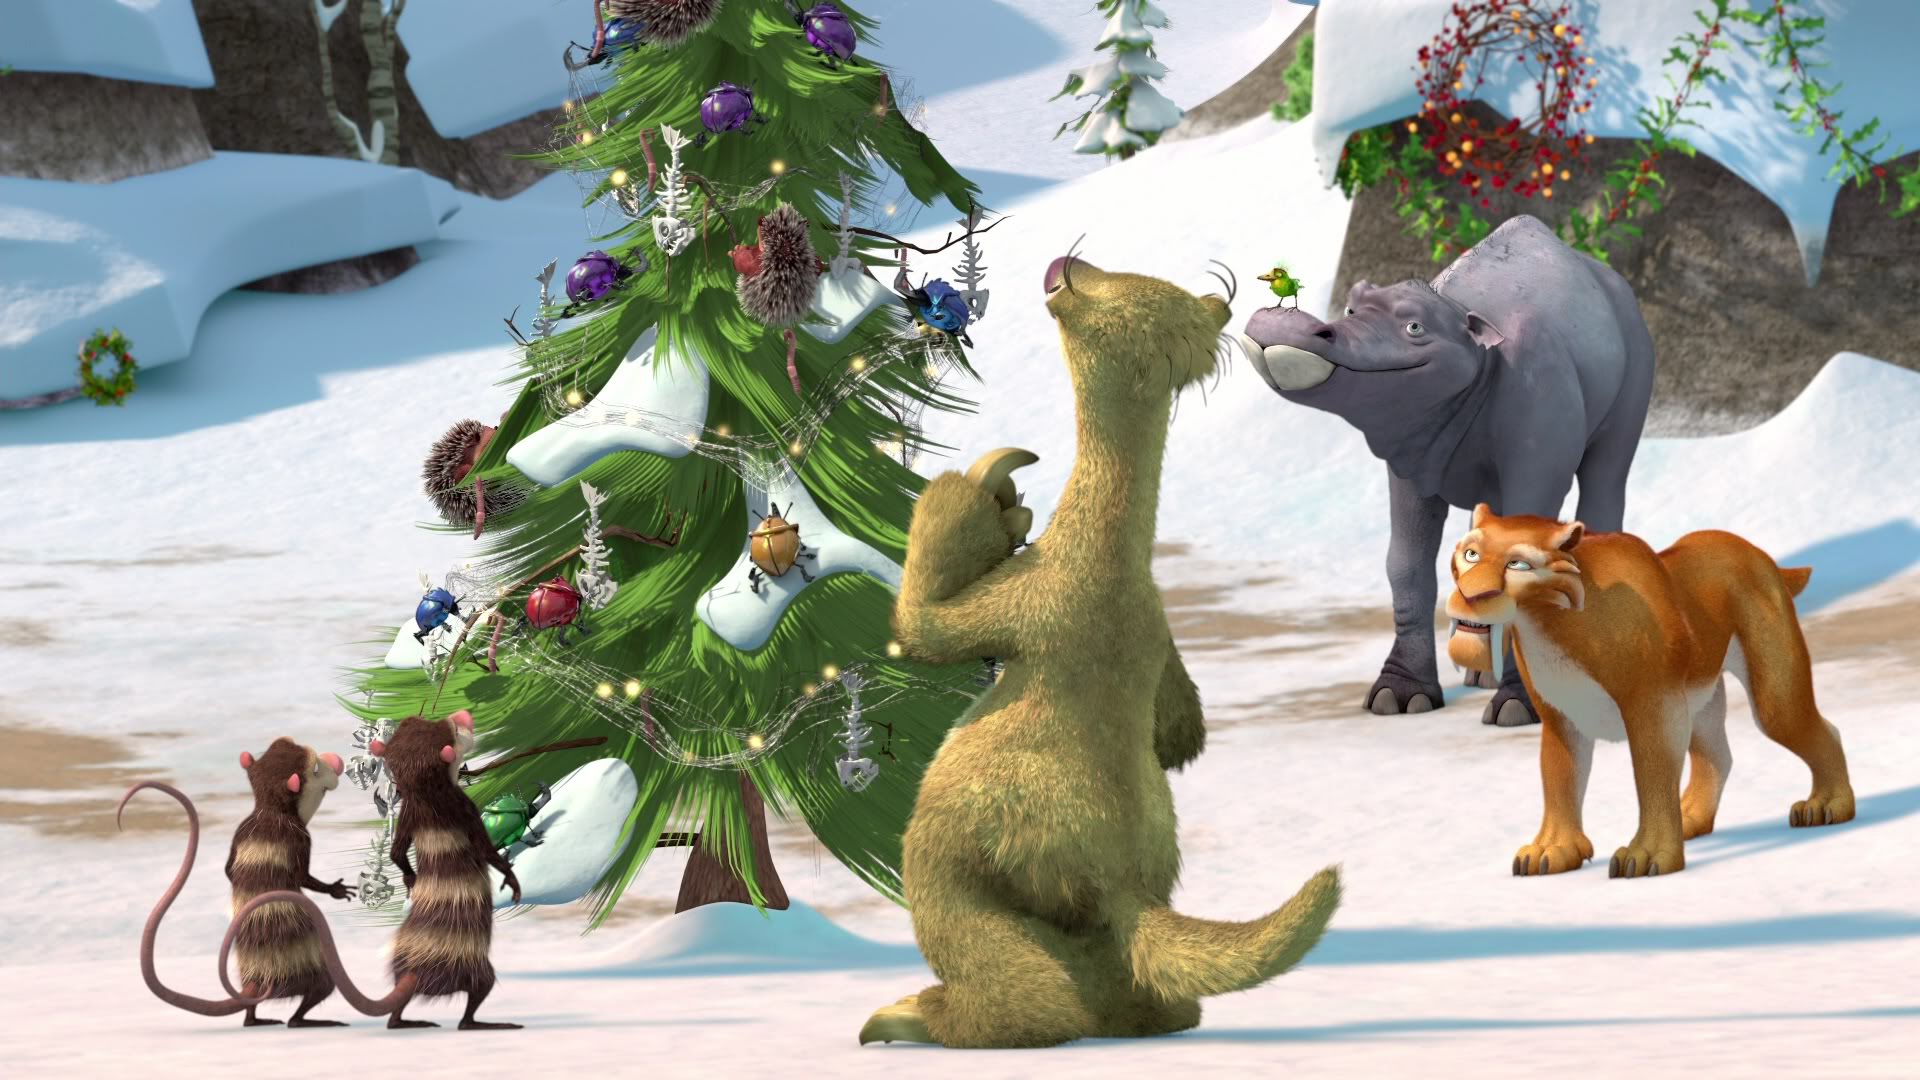 Sid from Ice Age is looking at a Christmas tree.